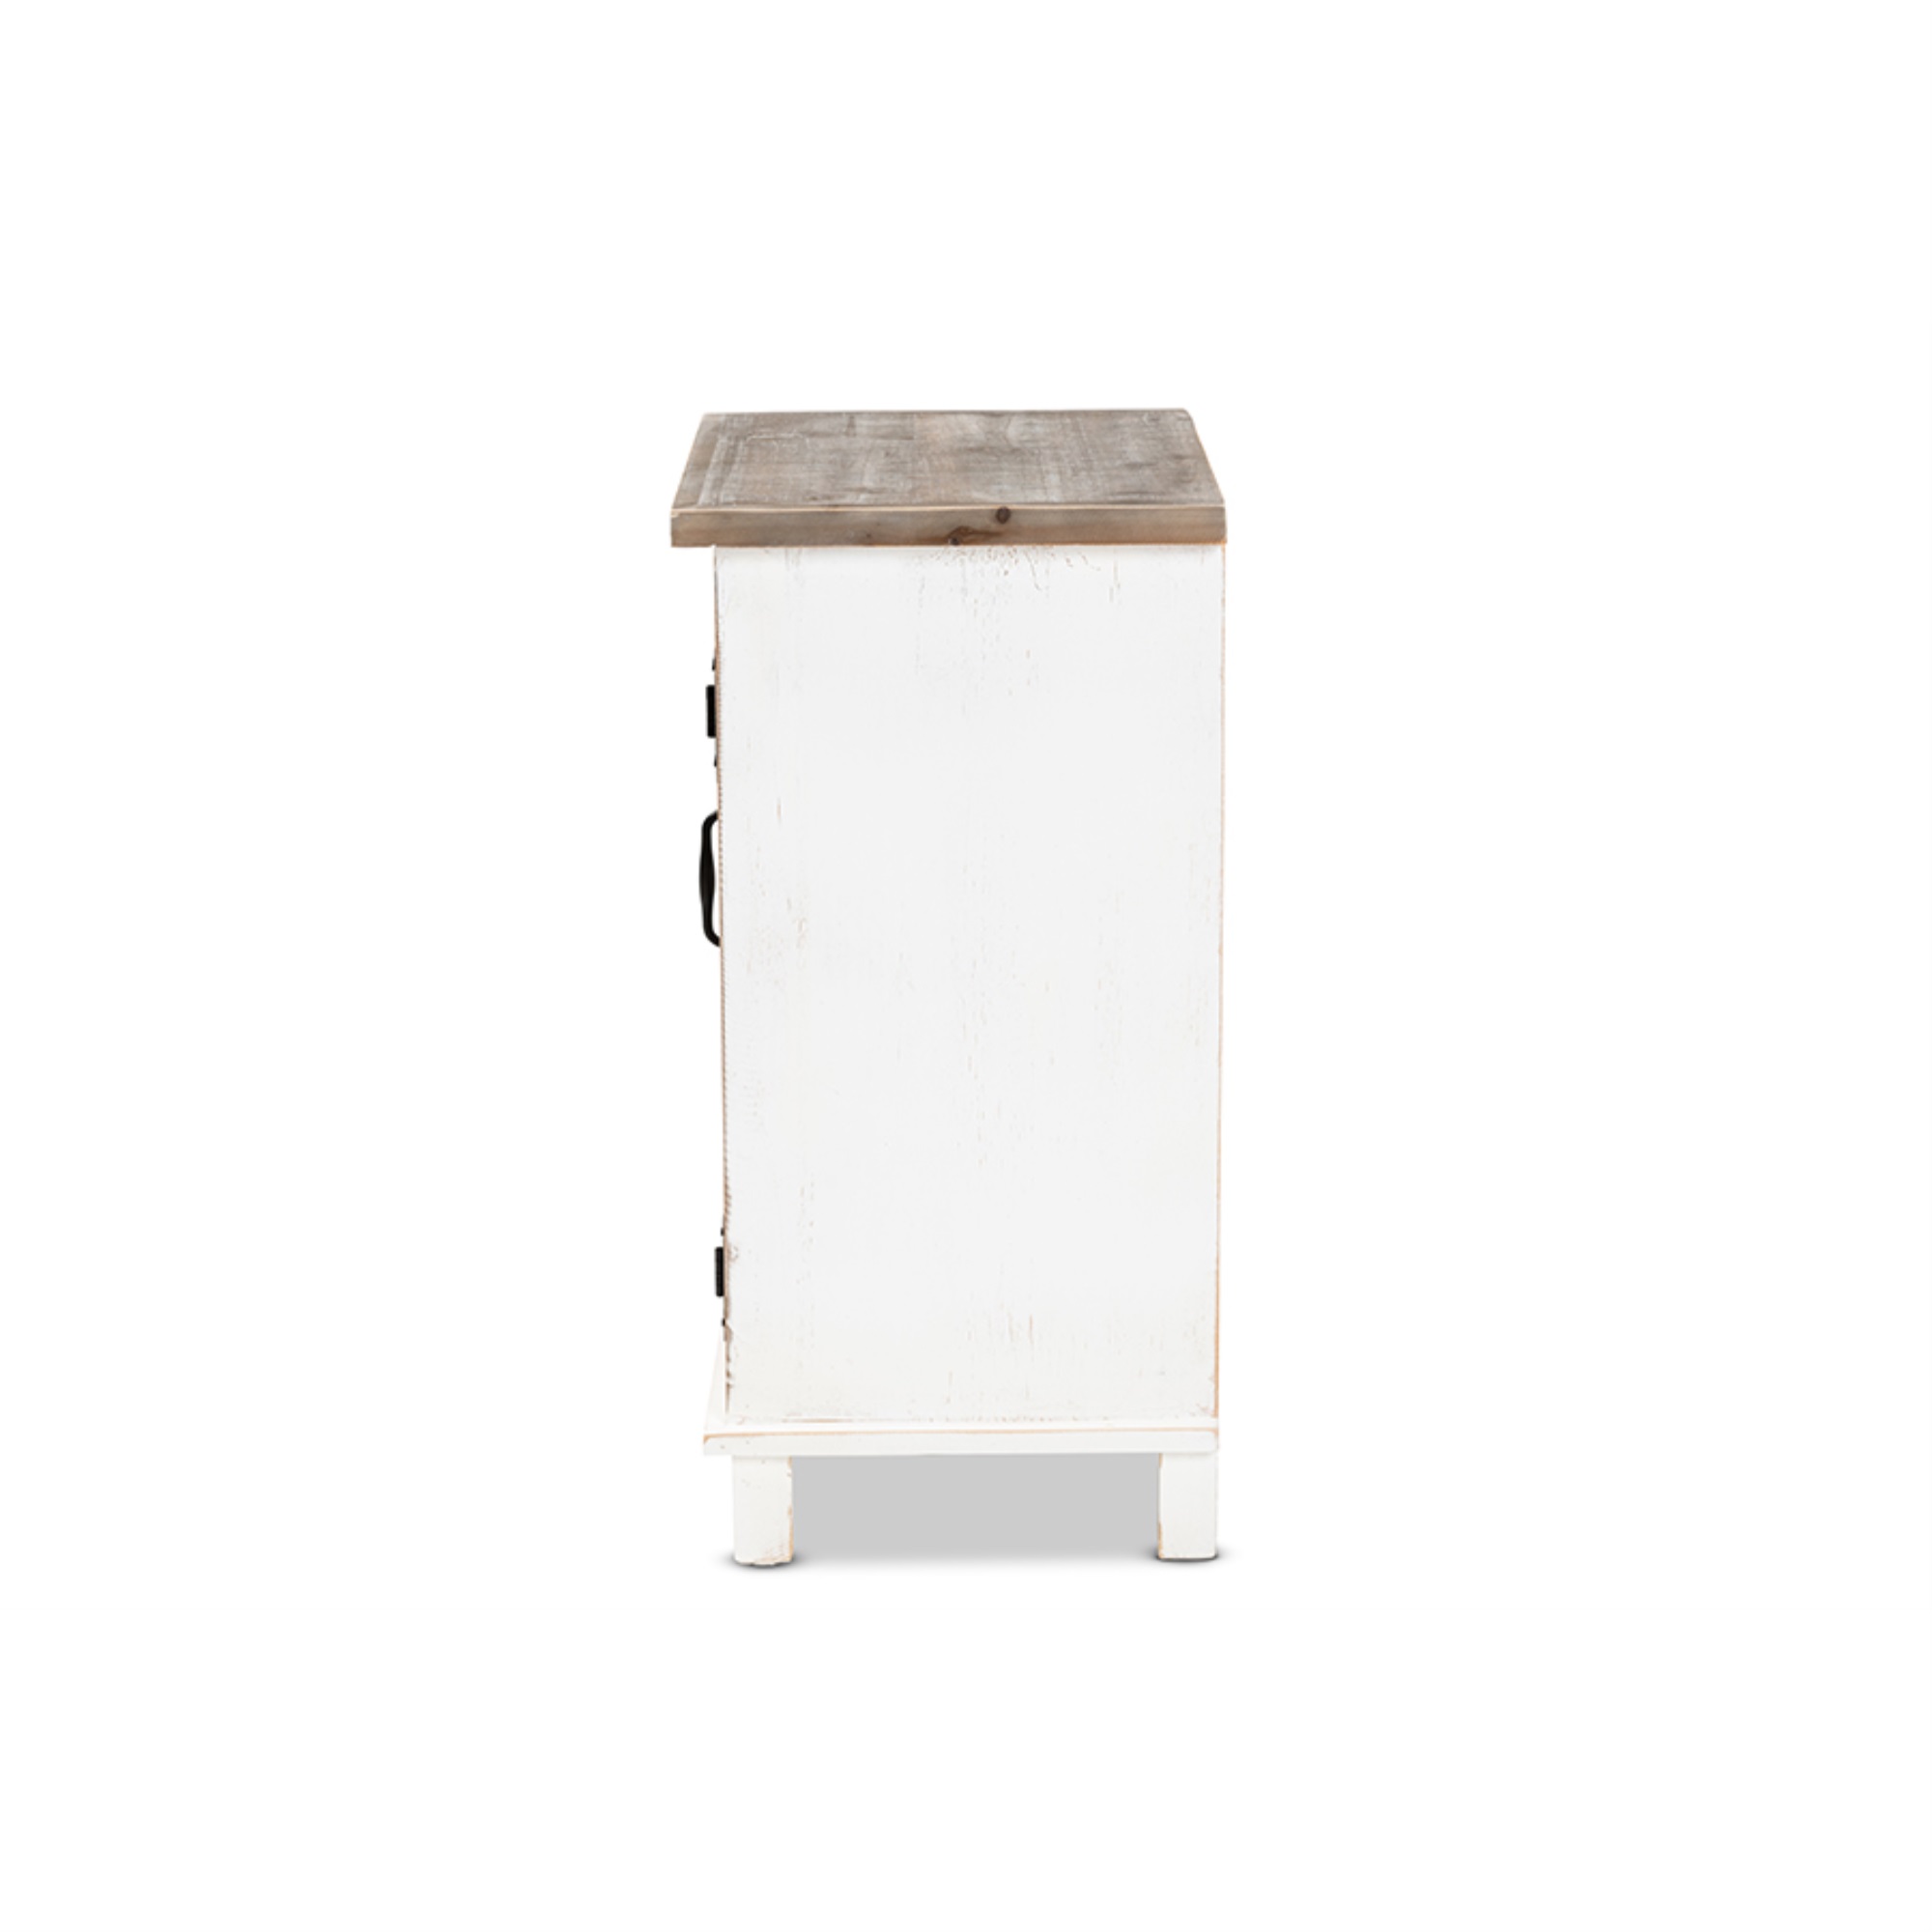 Baxton Studio Faron Distressed White and Brown Finished Wood 1-Door Nightstand - image 4 of 5